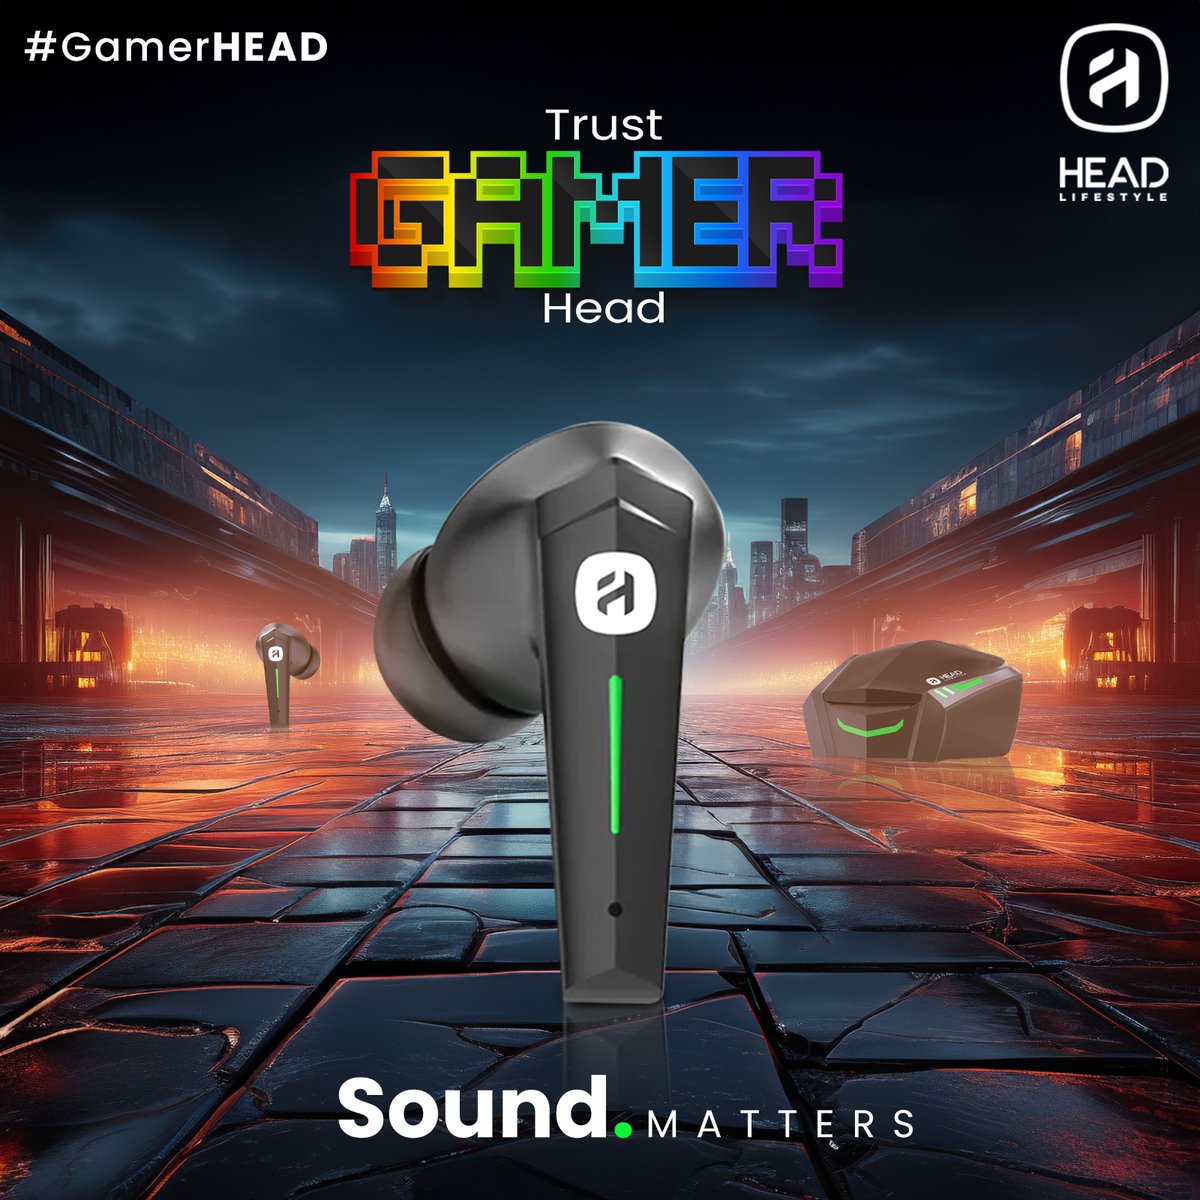 True gamers know the sound makes the experience.
Embrace the bass and crush the competition with low latency. Every footstep matters. 
Buy Now: amzn.in/d/5DOQu3M

#GamerLife #SoundMatters #LowLatency #GamingGem #HeadTWS #TWS #Gaming #earbuds #bluetooth #amazonfinds